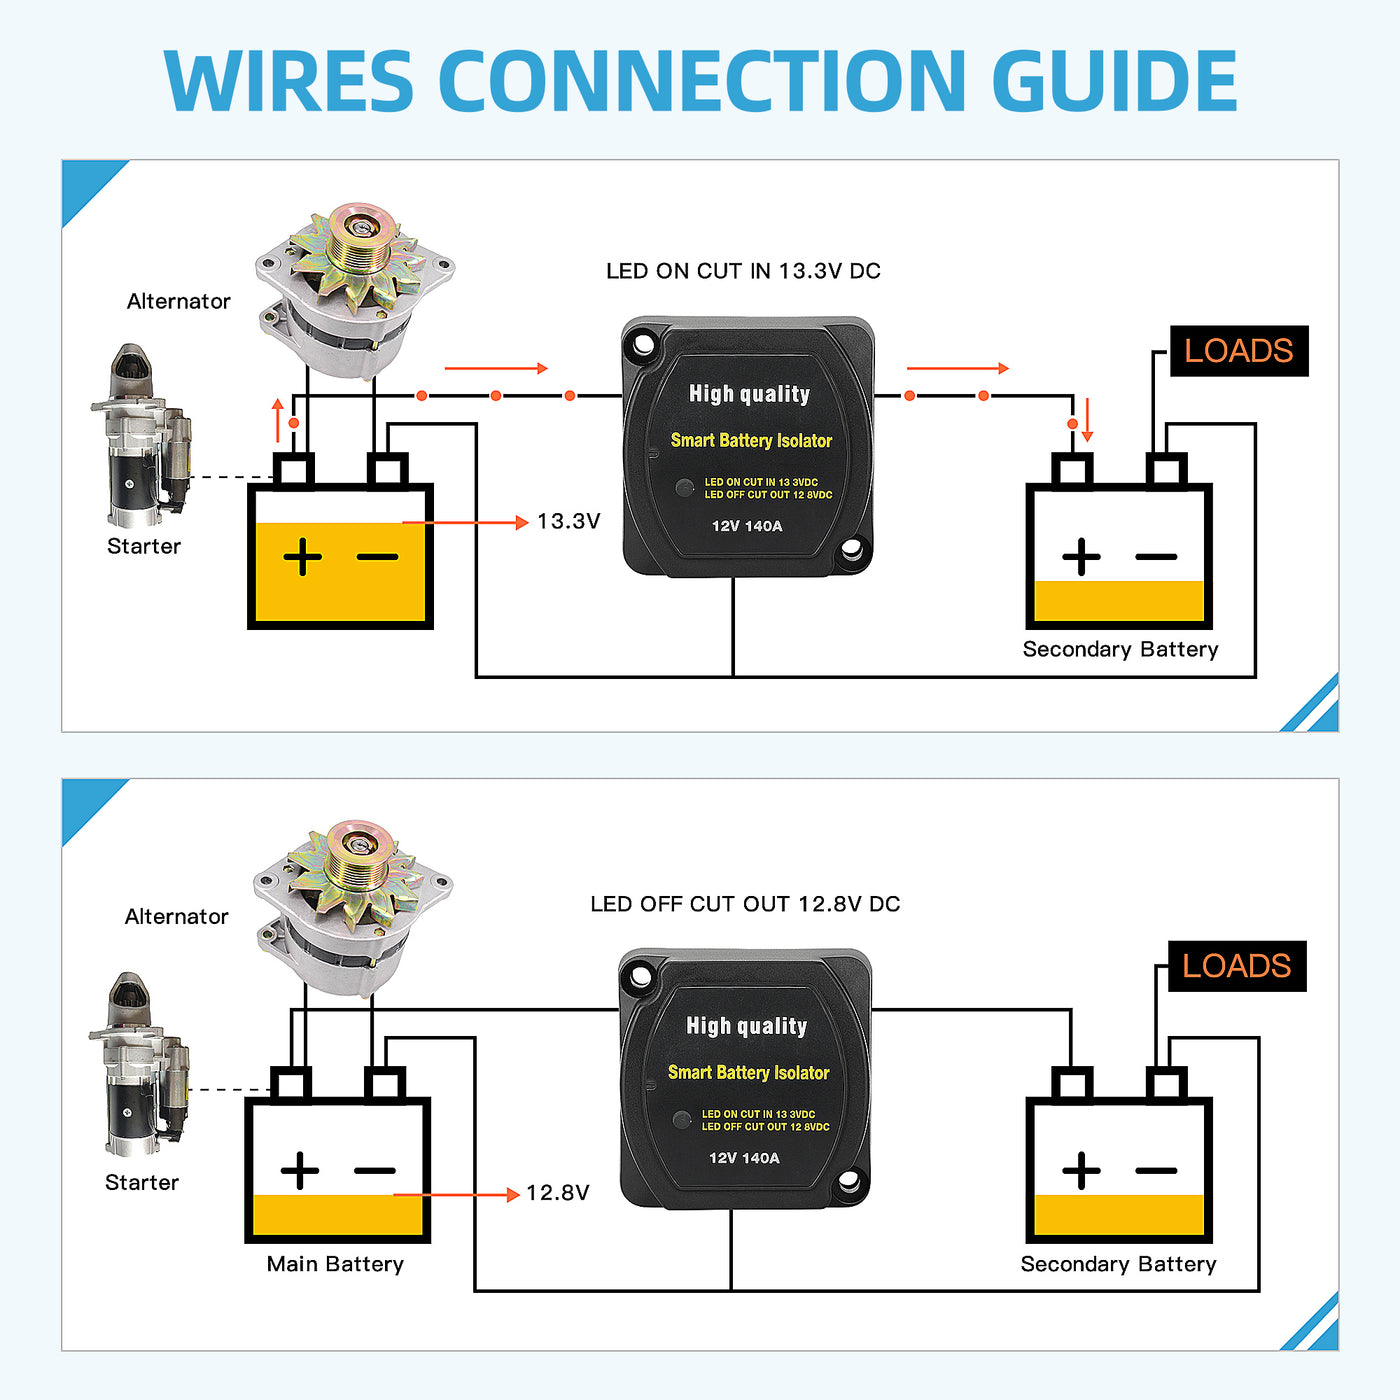 ASW-A401 140A 12V VSR Dual Battery Isolator Wires Connection Guide